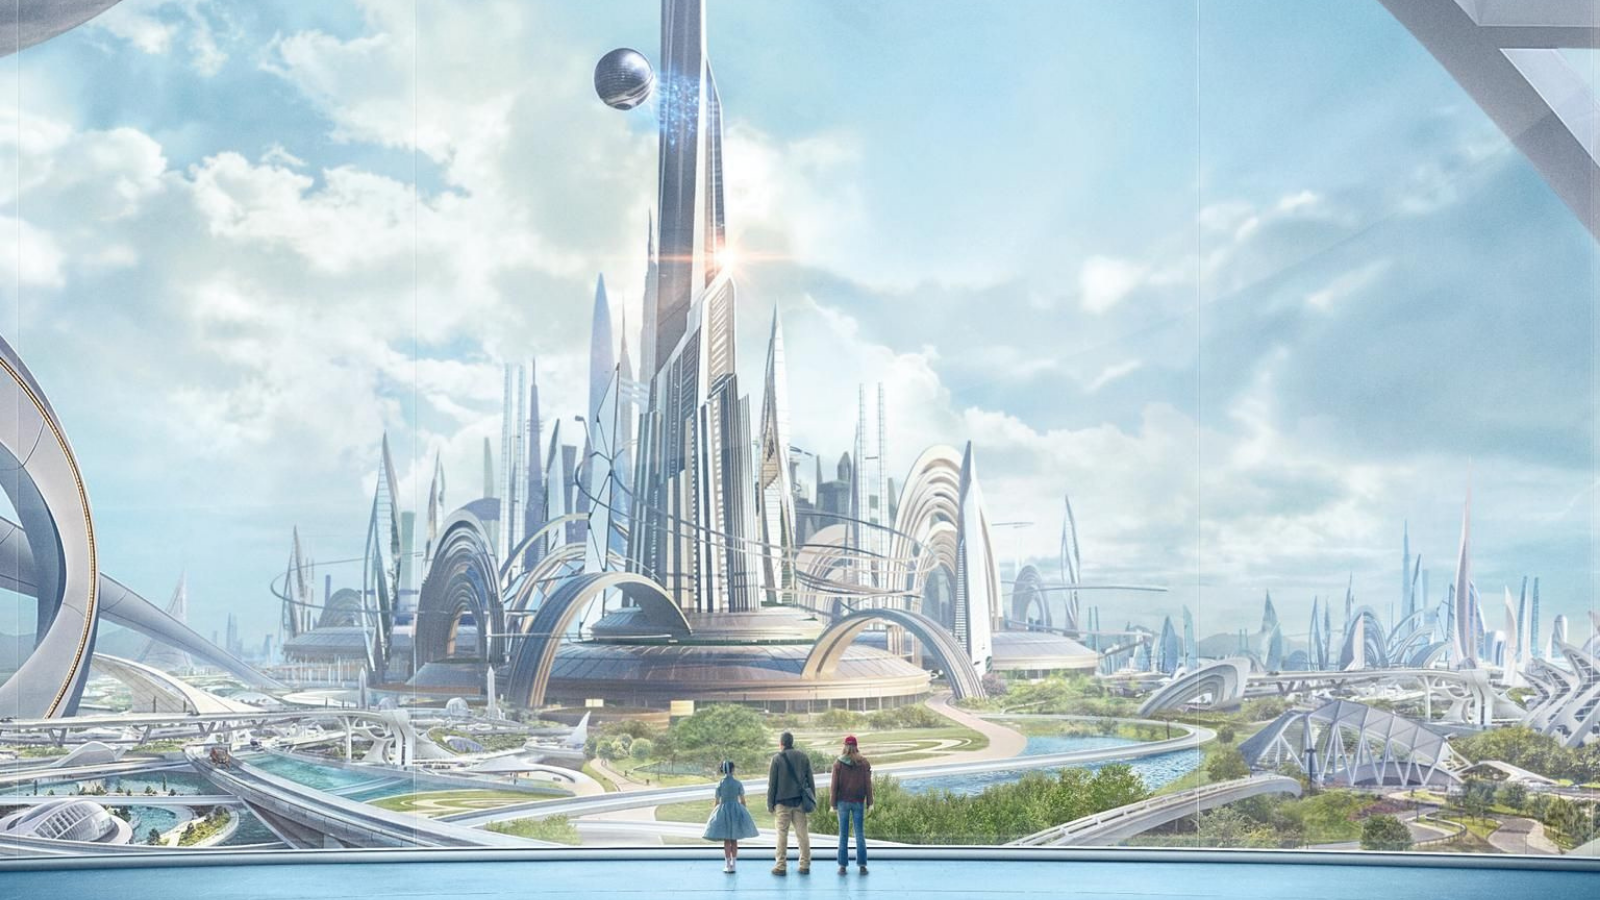 Bluebook Cities is inviting people to be residents of its futuristic semi-autonomous city